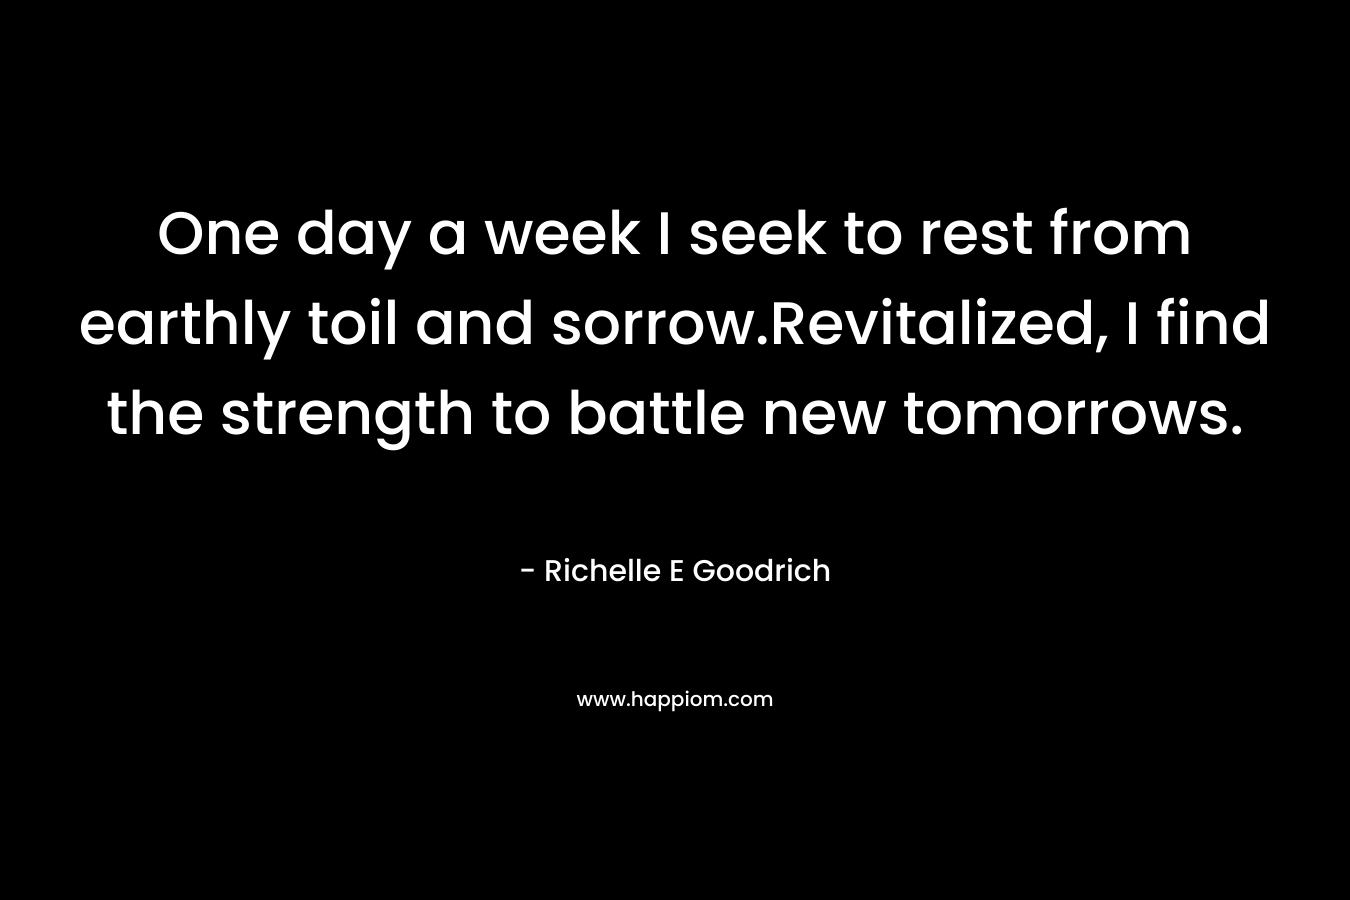 One day a week I seek to rest from earthly toil and sorrow.Revitalized, I find the strength to battle new tomorrows. – Richelle E Goodrich